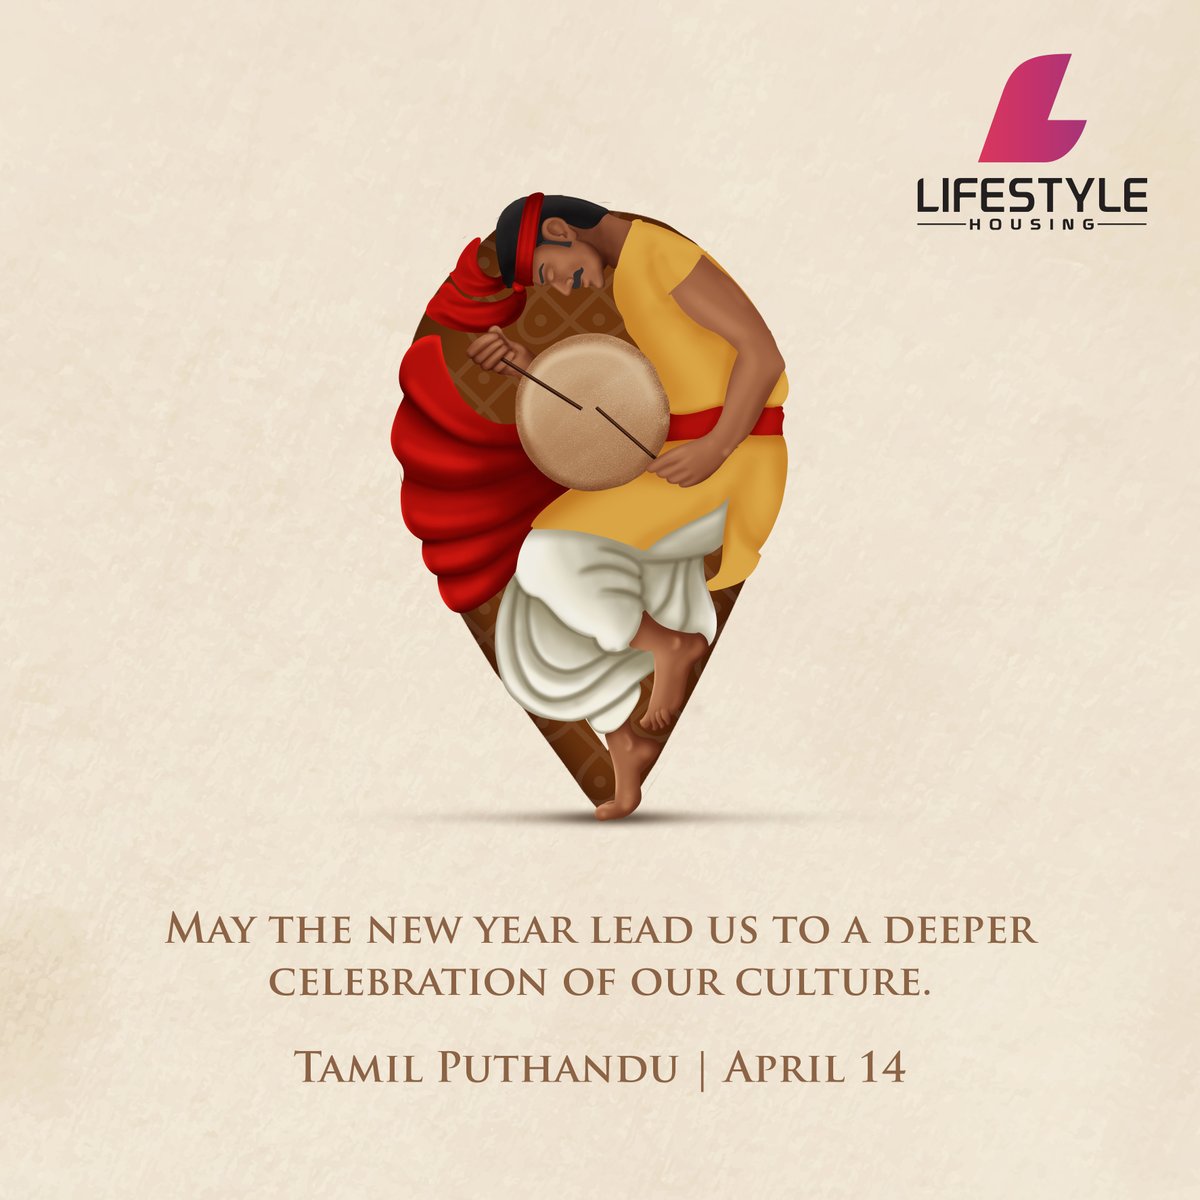 On this auspicious day of Tamil Puthandu, let's raise a virtual vibhuti (holy ash) to a year filled with cultural exploration and appreciation. May we continue to cherish the traditions that bind us together.
#lifestylehousing  #TamilPuthandu #HappyTamilNewYear